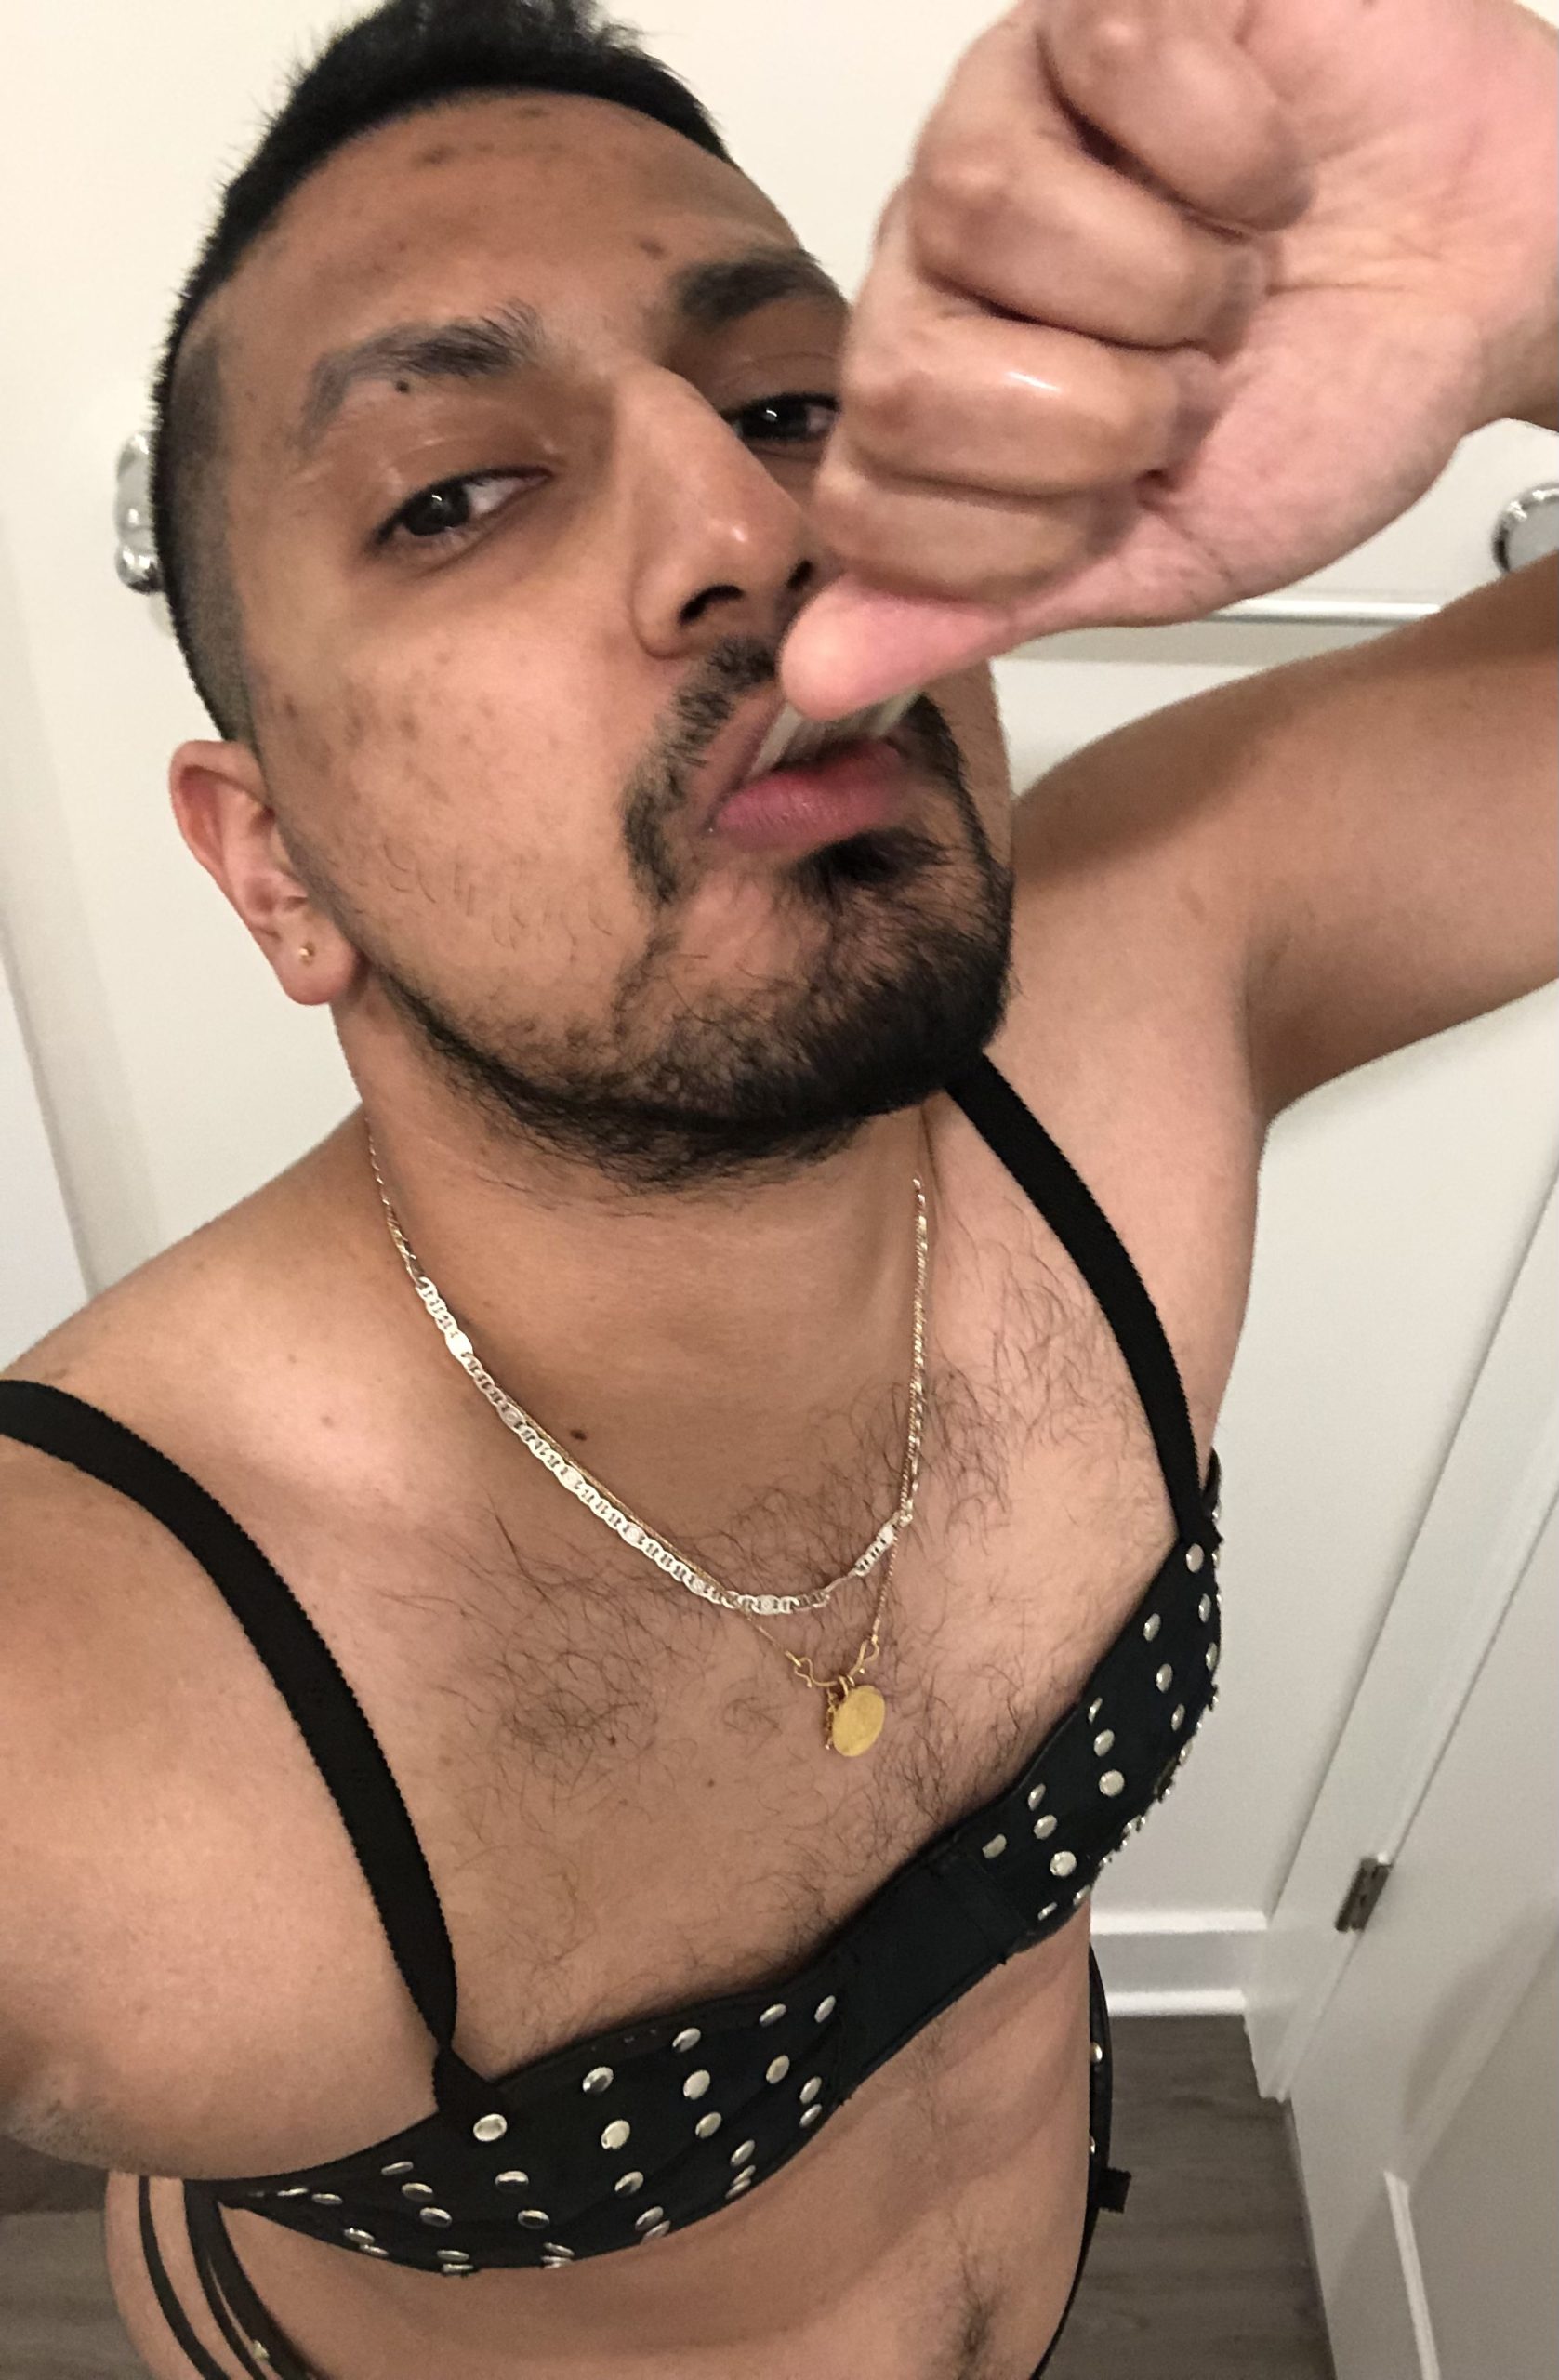 Slave Task: Drinking My Own Piss